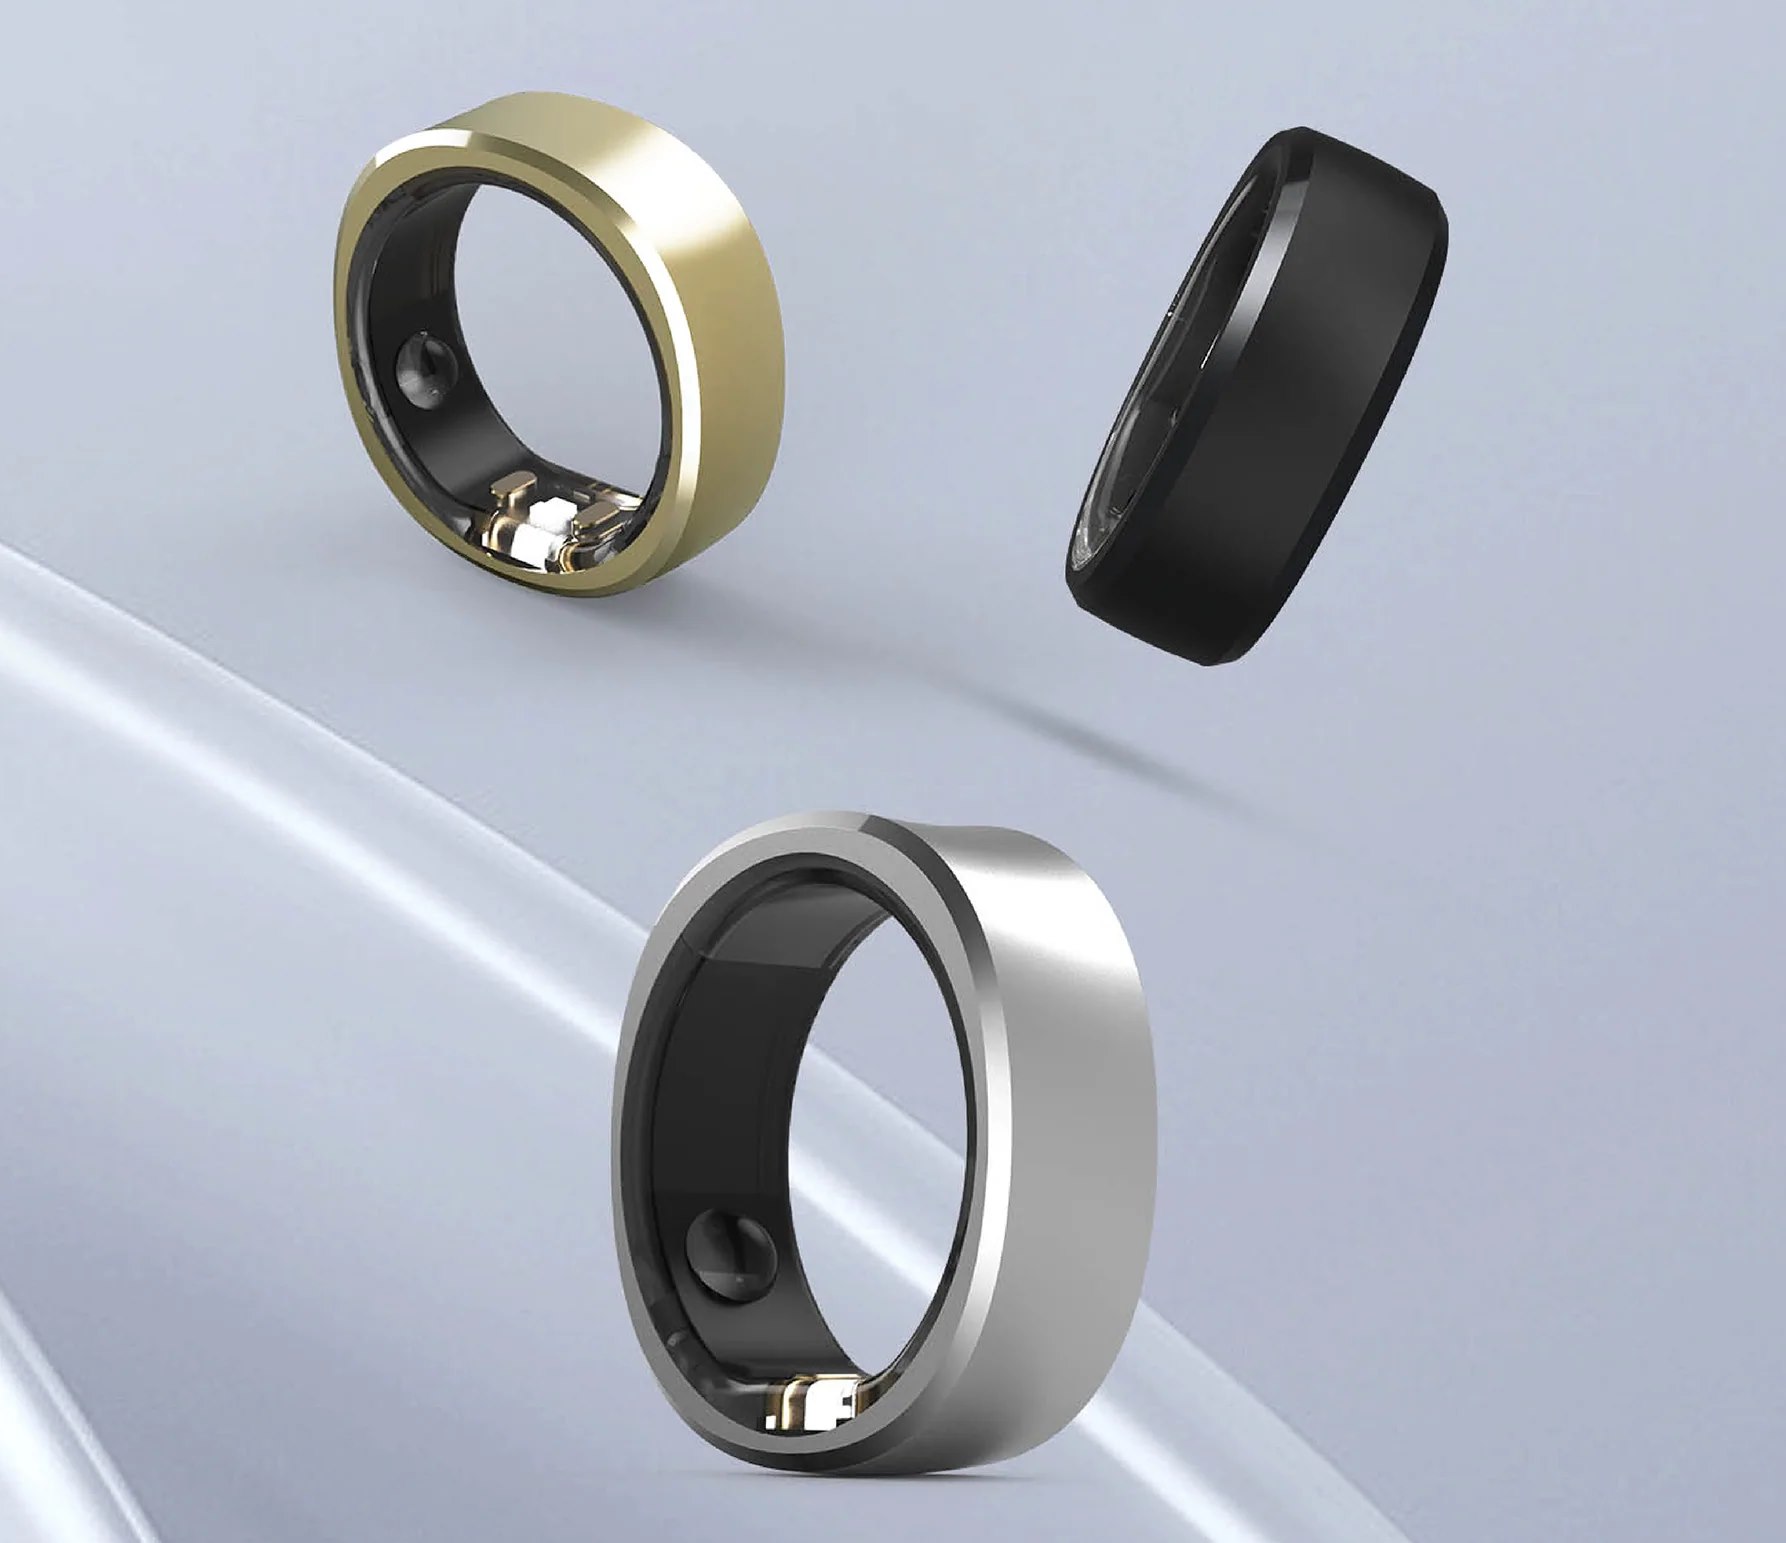 RingConn: Neues Wearable in Ring-Form mit wochenlanger